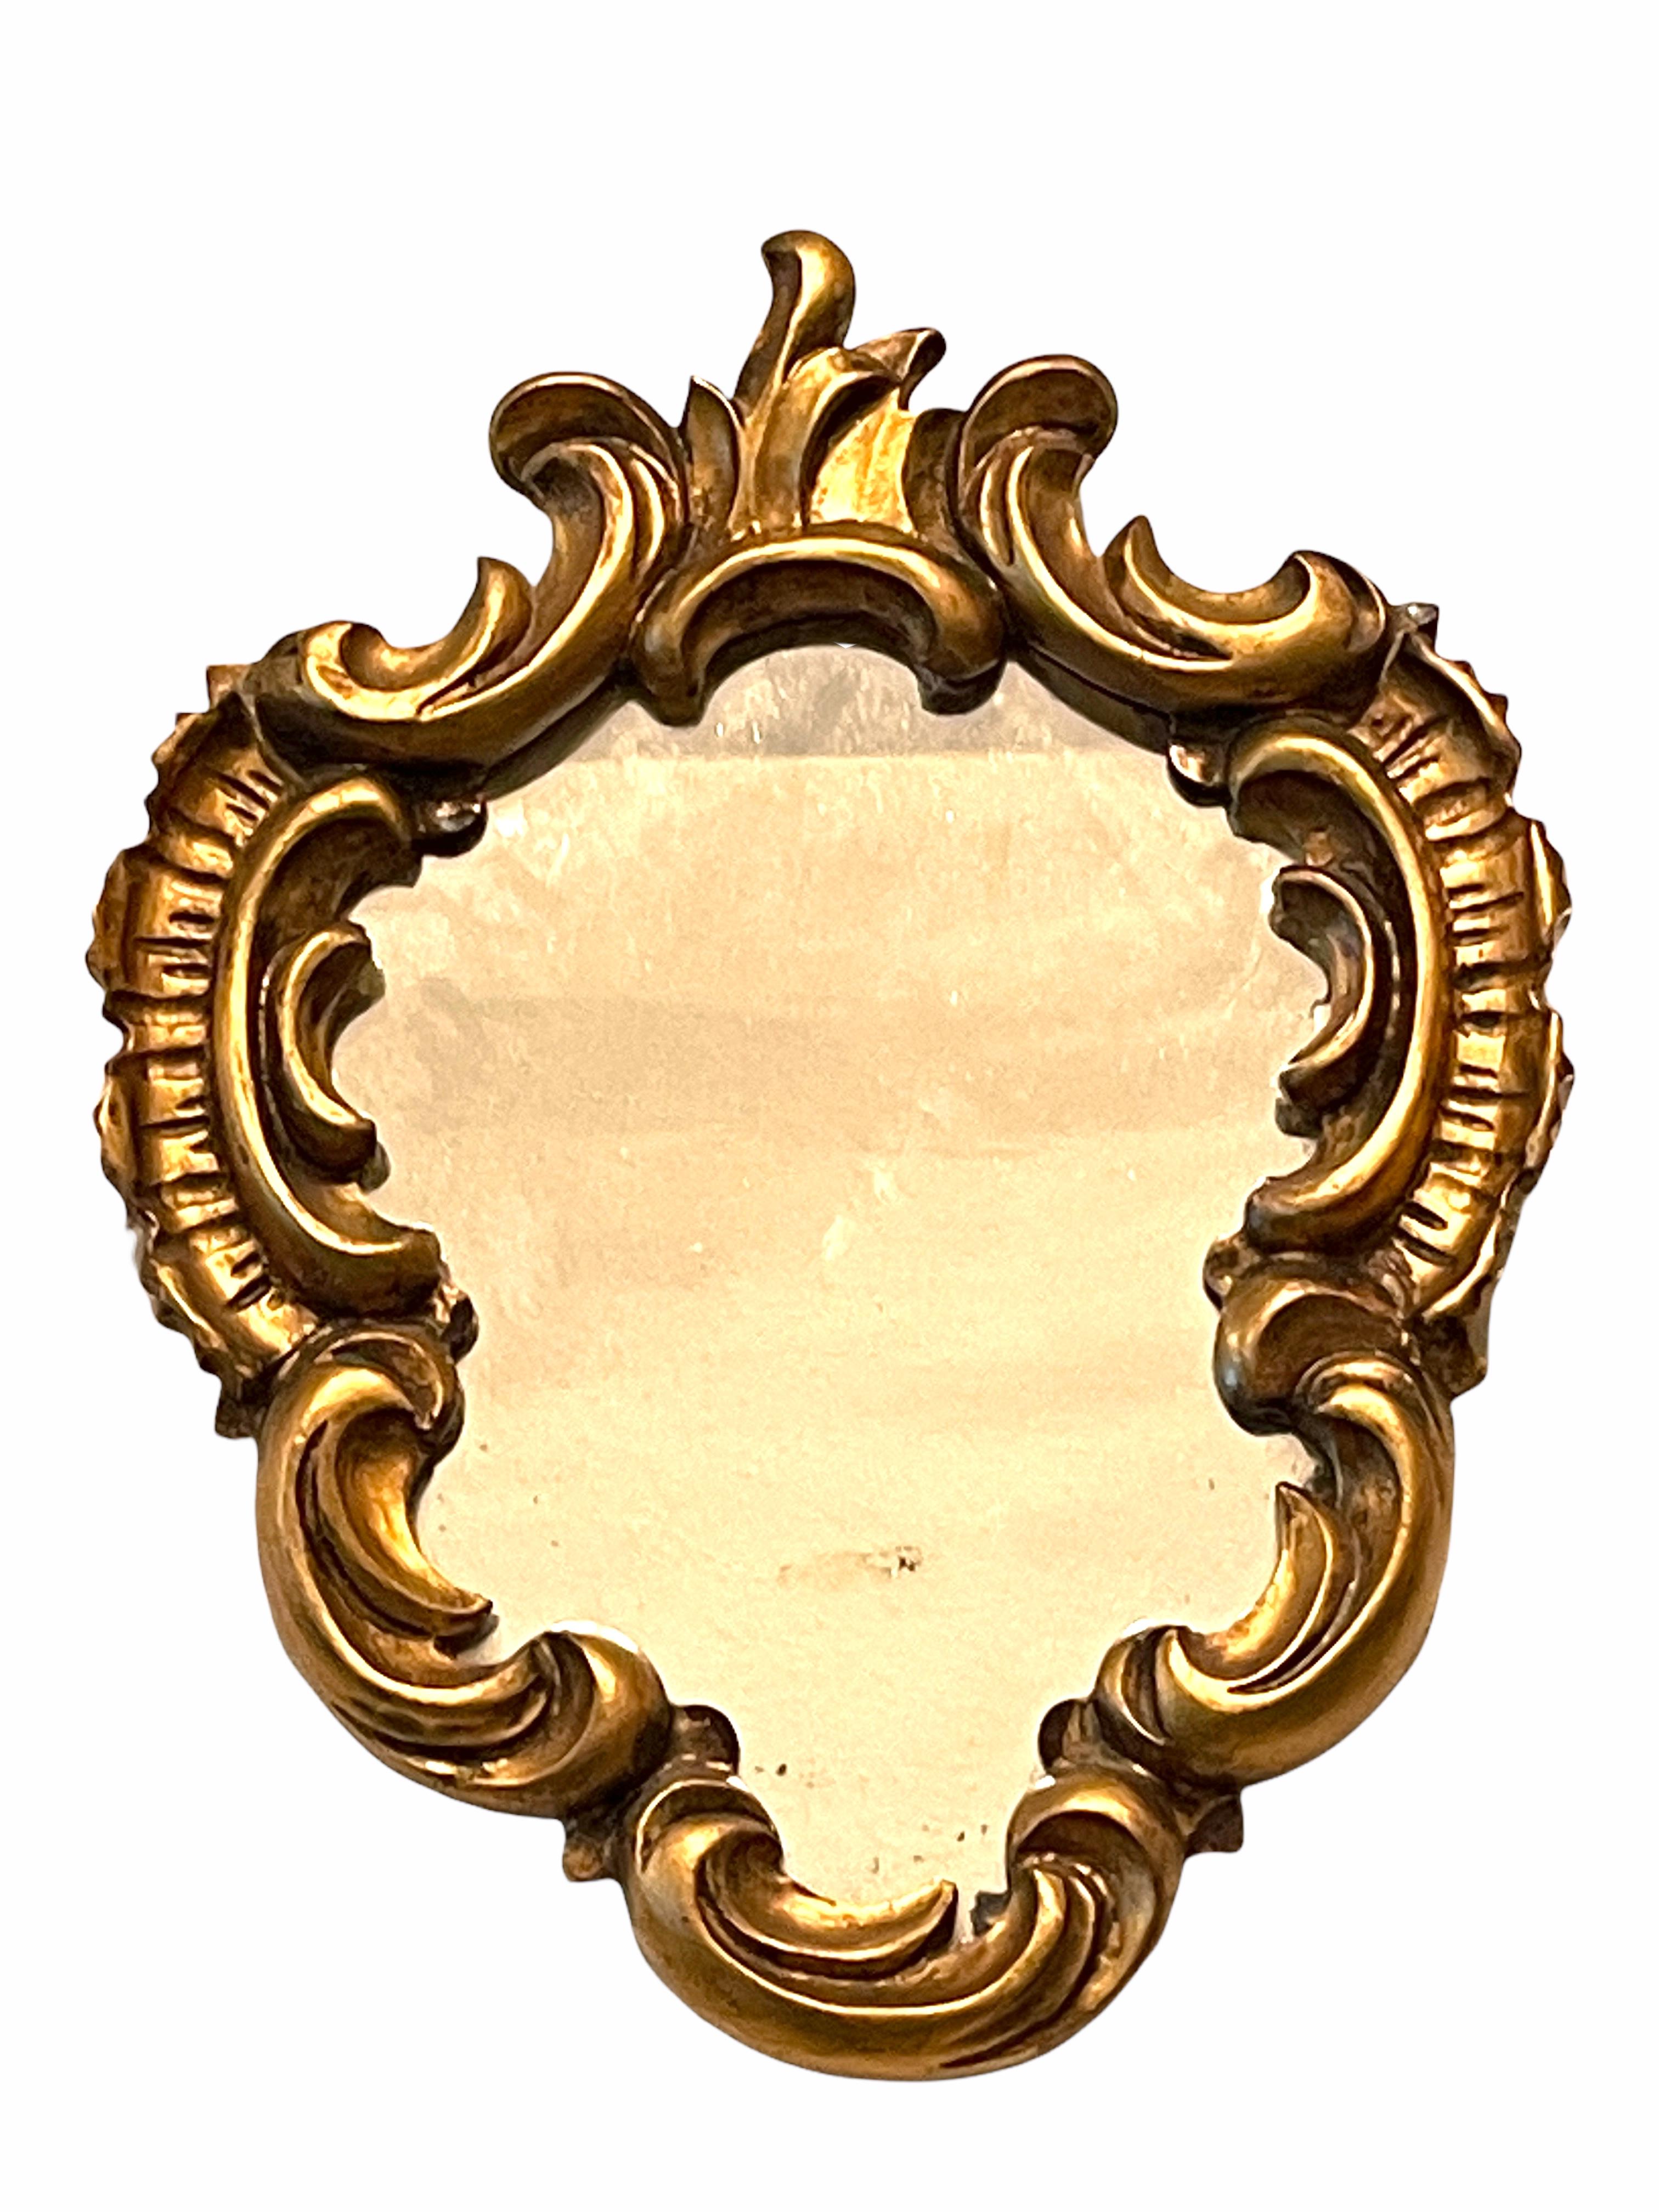 A gorgeous toleware mirror. Made of gilt wood and composition. A nice addition to any room.